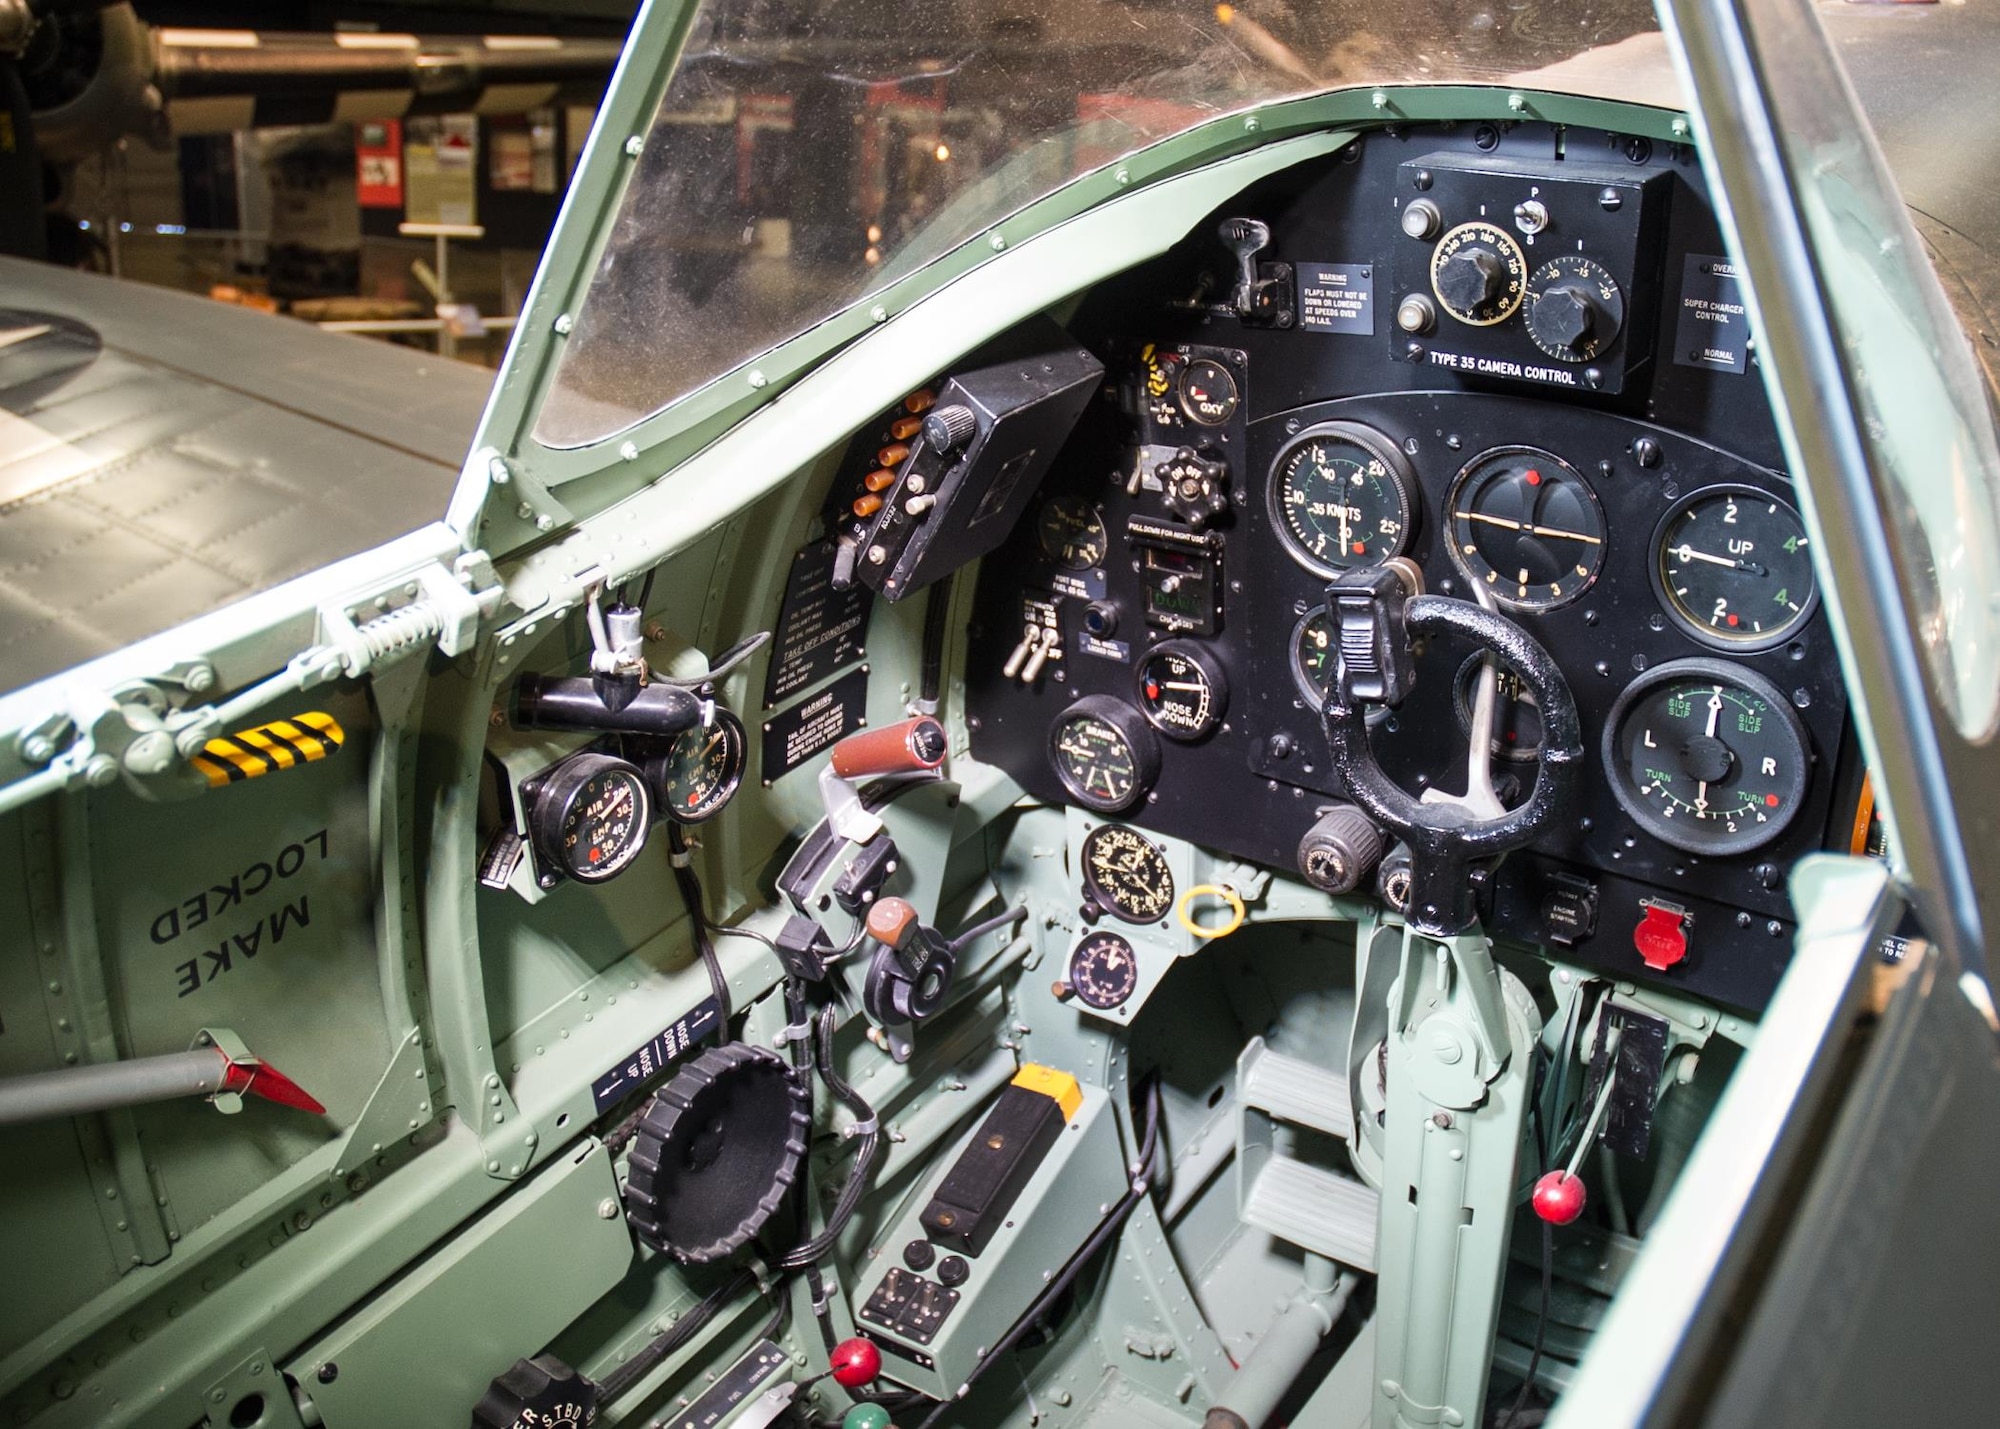 DAYTON, Ohio -- Supermarine Spitfire Mk XI cockpit in the World War II Gallery at the National Museum of the United States Air Force. (U.S. Air Force photo)